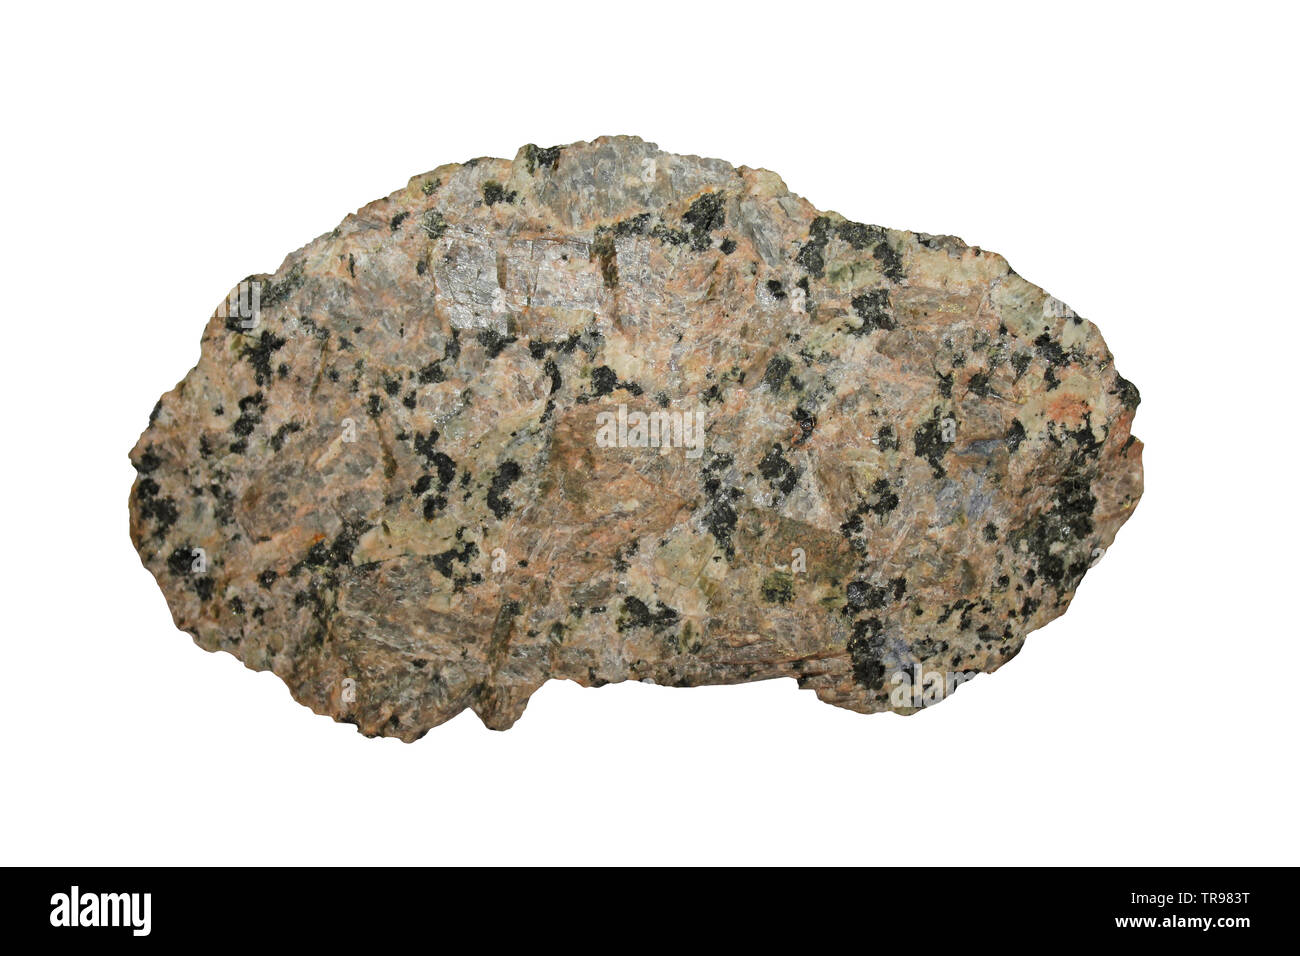 Rapakivi Granite - a hornblende-biotite granite containing large round crystals of orthoclase each with a rim of oligoclase (a variety of plagioclase) Stock Photo